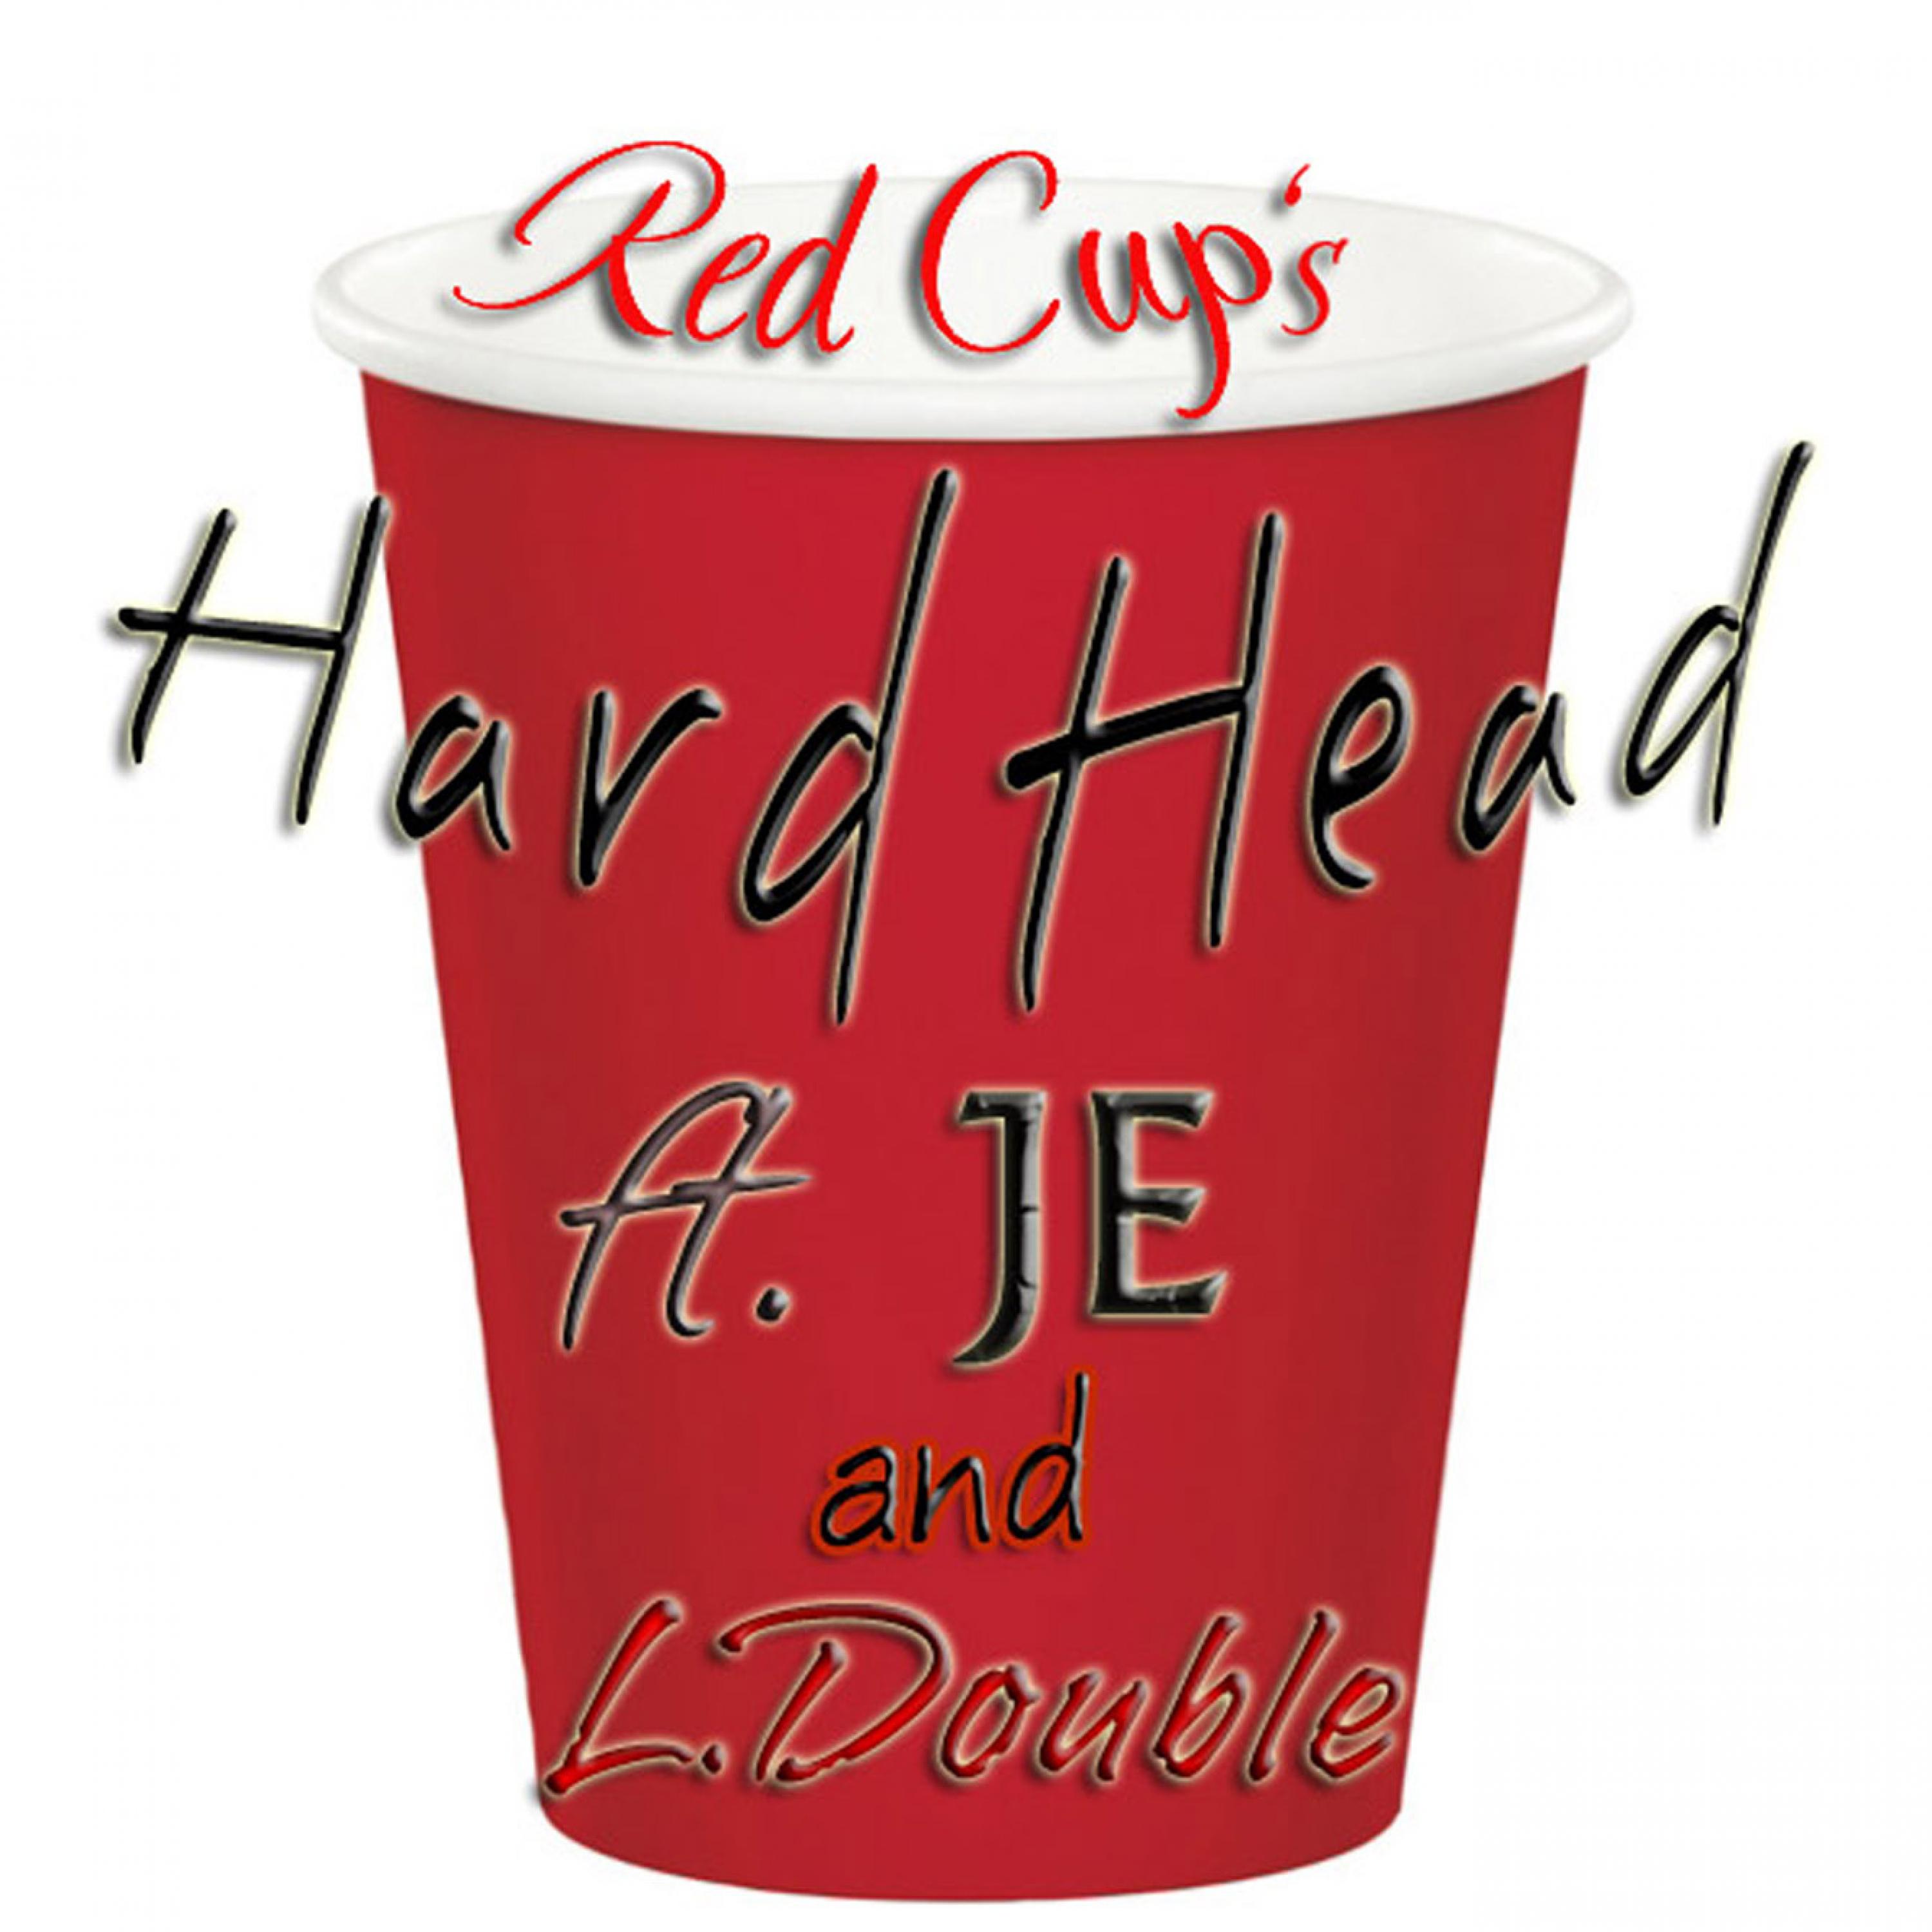 Red Cup's (feat. JE & L Double) - Single